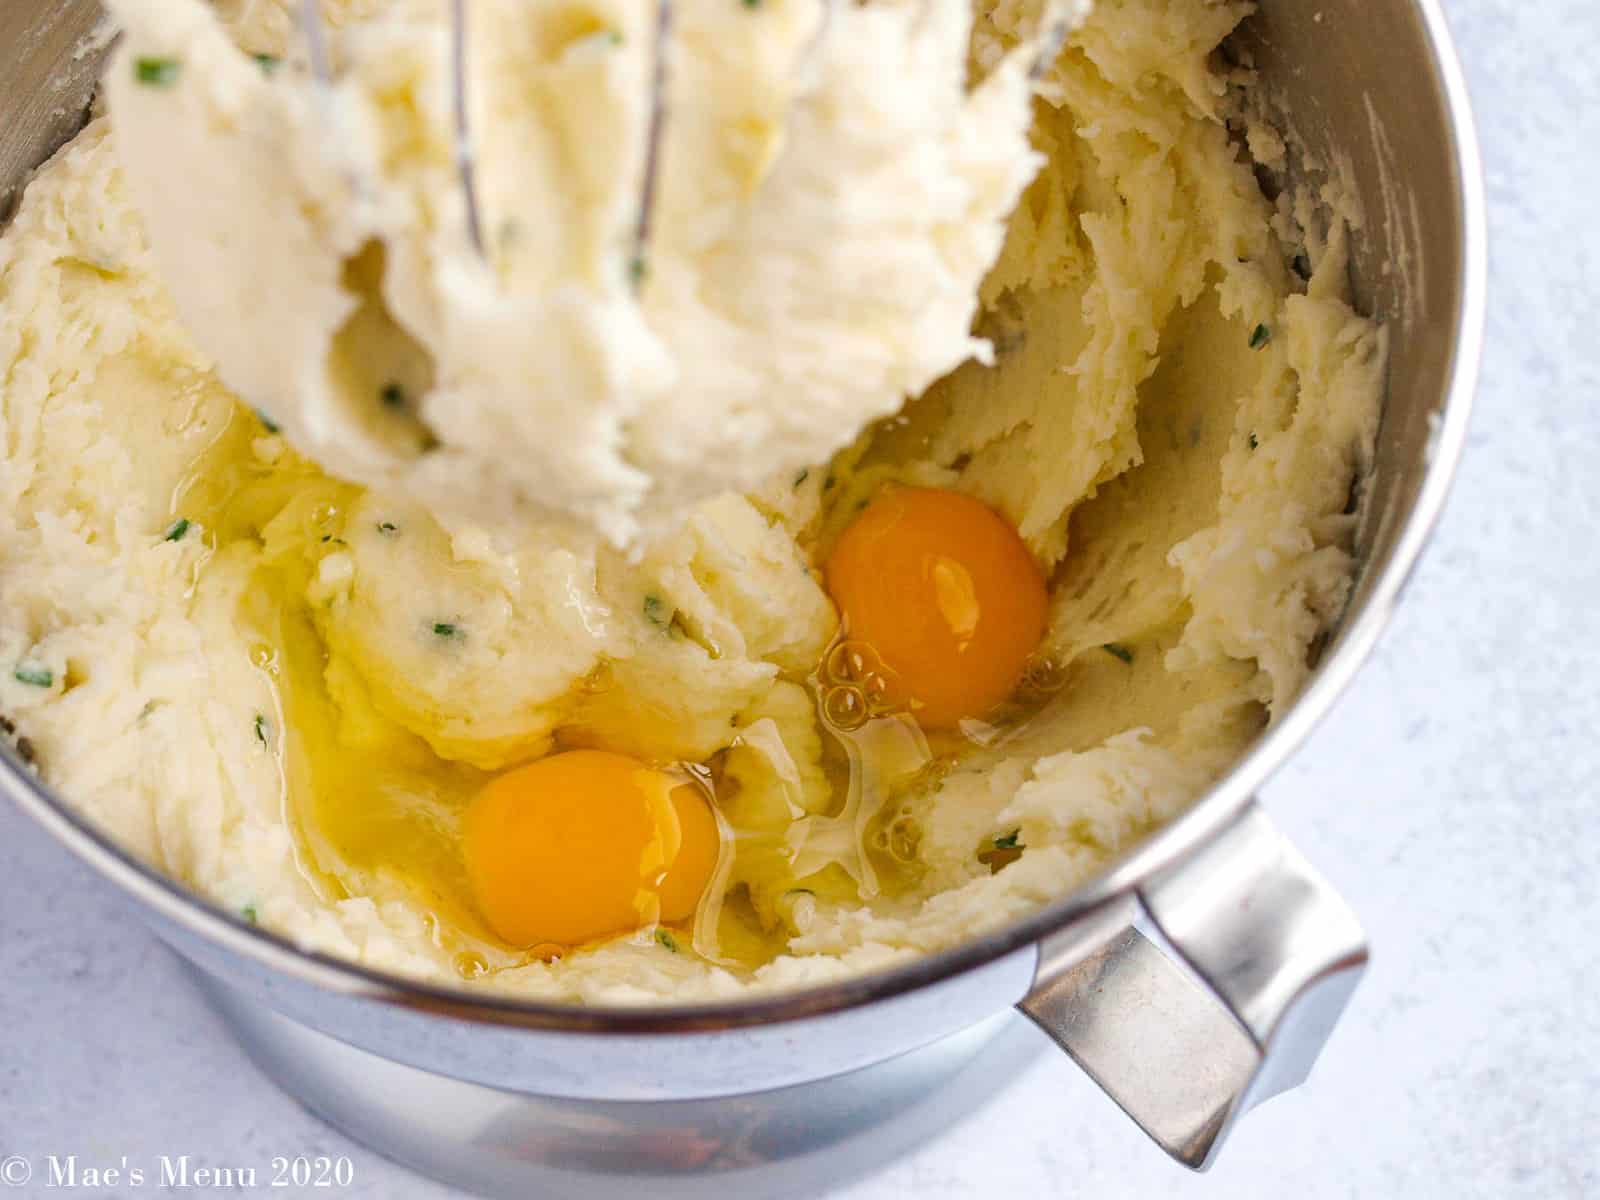 Eggs and mashed potatoes in a stand mixer with a whisk attachment